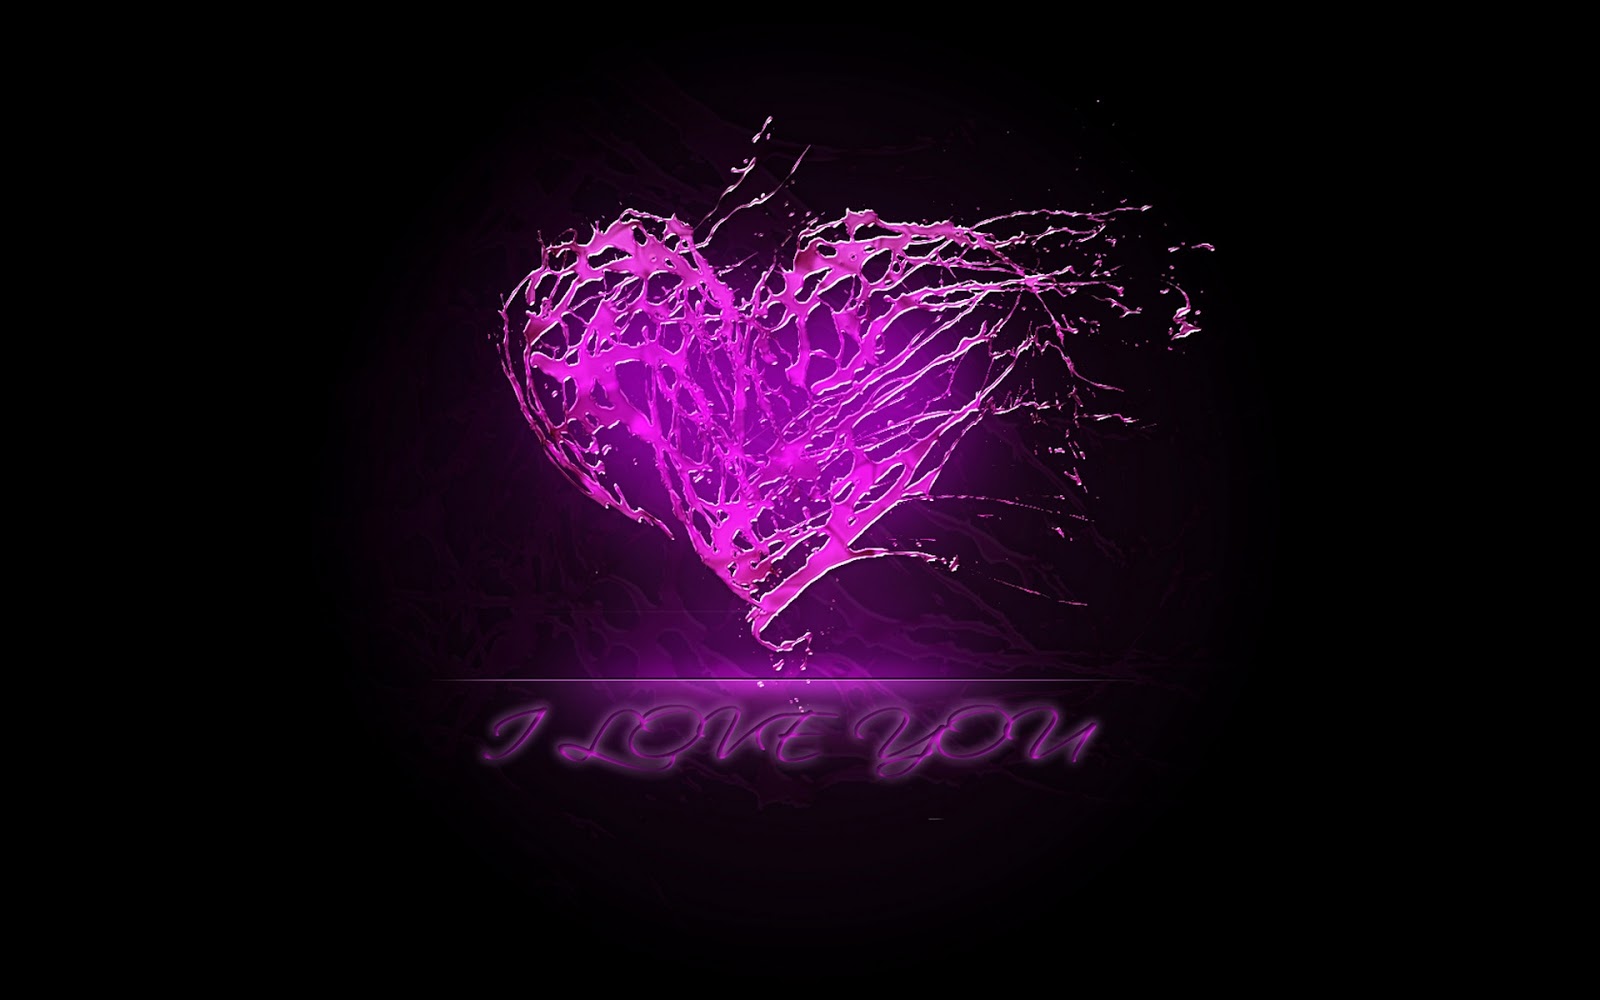 Purple Heart Background 50 pictures